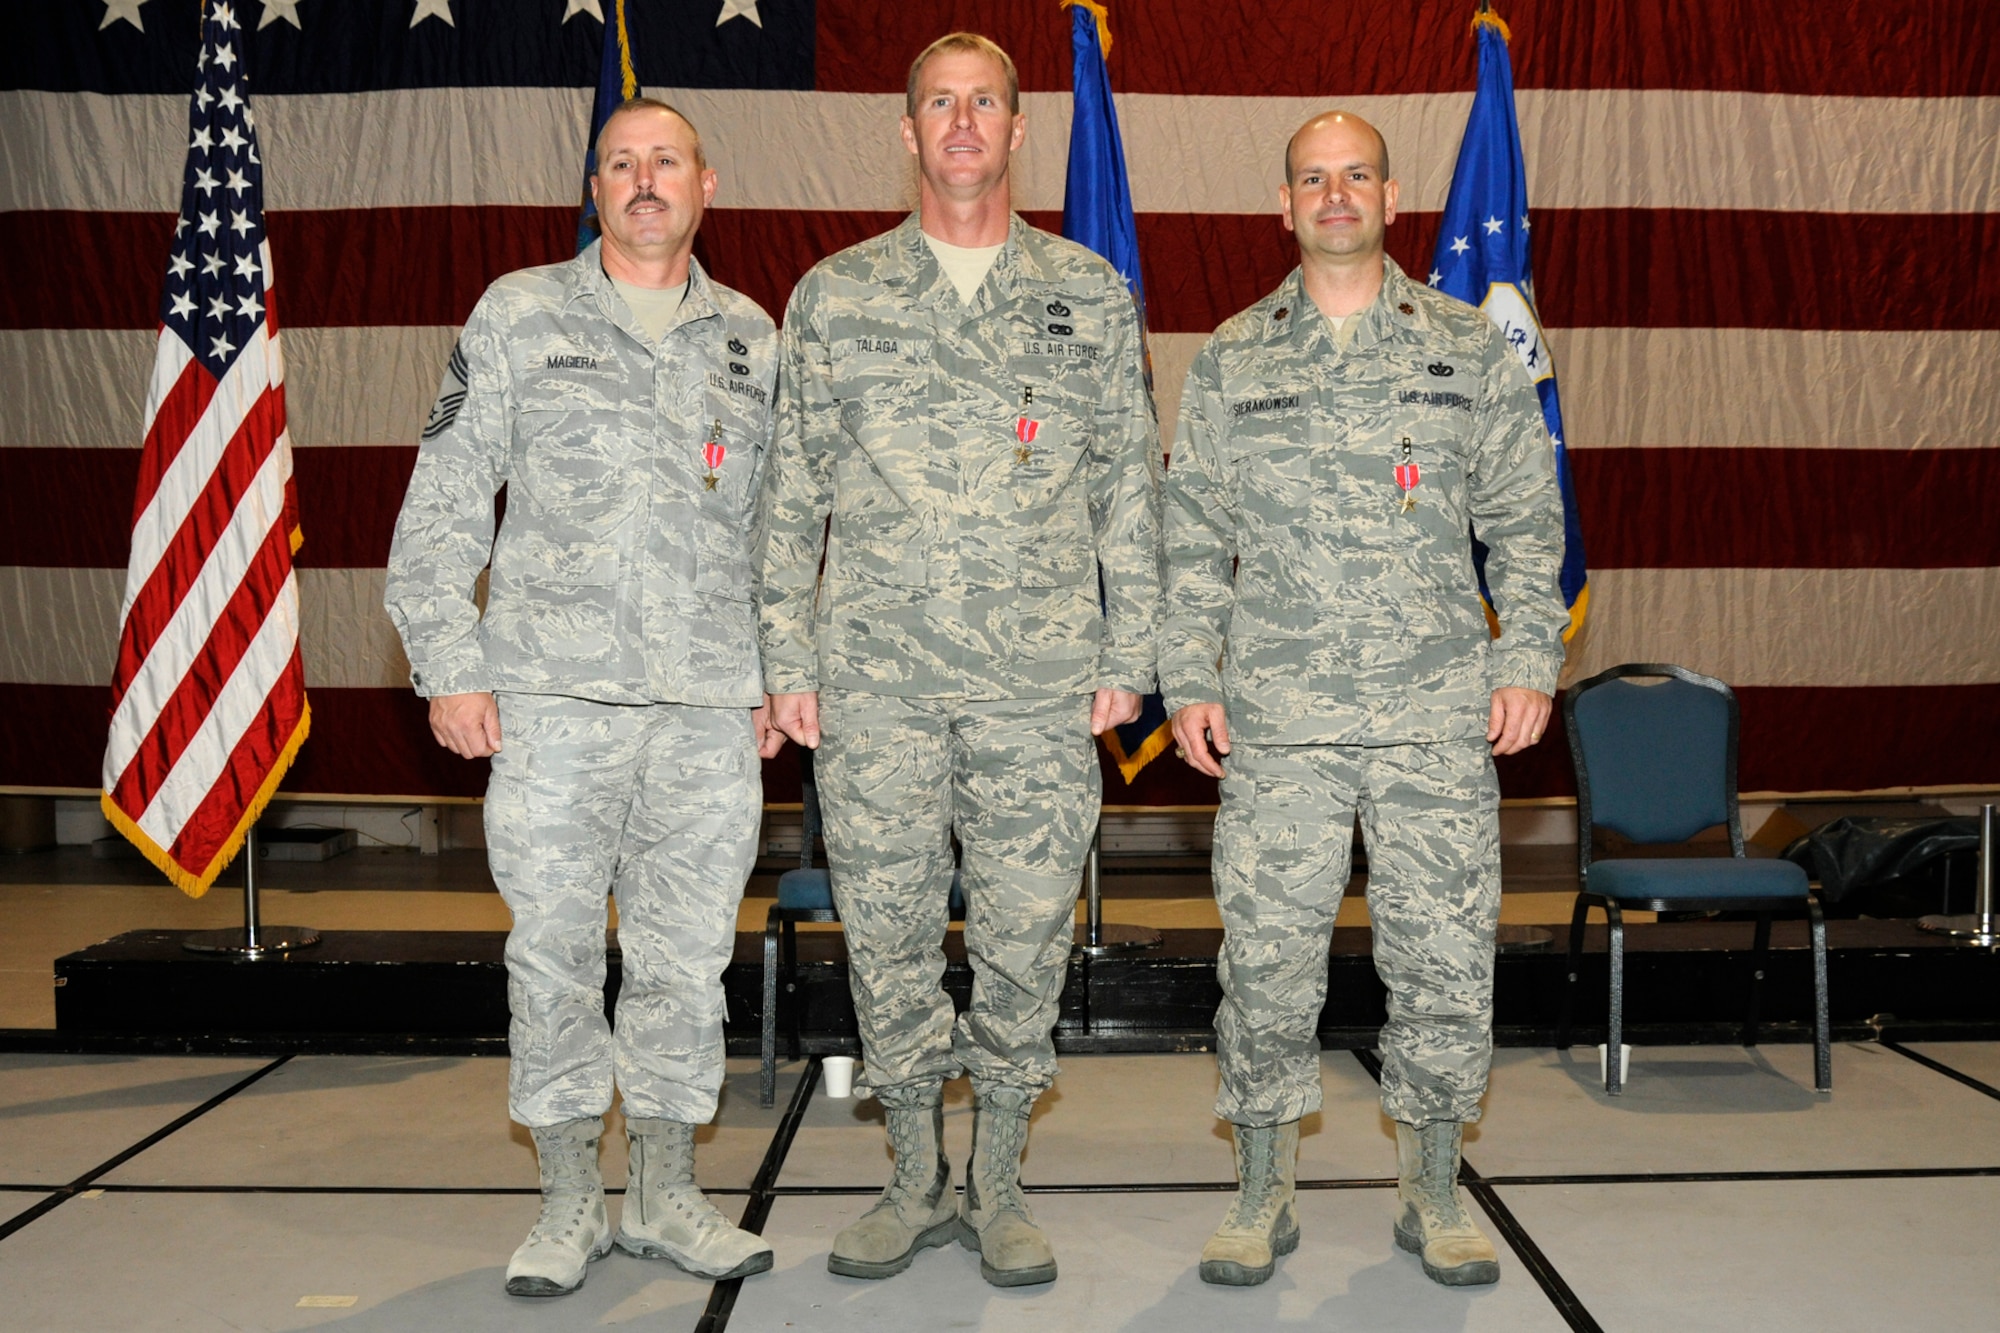 Chief Master Sgt. Matt Mageira, Senior Master Sgt. Jeff Talaga and Major Tom Sierkowski were awarded the Bronze Star Medal for their service in Afghanistan in 2011. The three Airmen, all assigned to the 127th Civil Engineering Squadron at Selfridge Air National Guard Base, Mich., served with a construction unit while forward deployed. During their deployment, the three Airmen served as leaders of the squadron, which was integrated with an Army engineering brigade. The Air Force squadron accomplished over 160 construction projects, worth more than $75 million. During their deployment, they and their squadron conducted numerous outside the wire missions and built the largest AM-2 MATT airfield in Air Force history, allowing for the completion of five named combat operations. The Airmen were awarded the medals at a Dec. 4, 2011, commanders call at Selfridge. (U.S. Air Force photo by TSgt. David Kujawa)